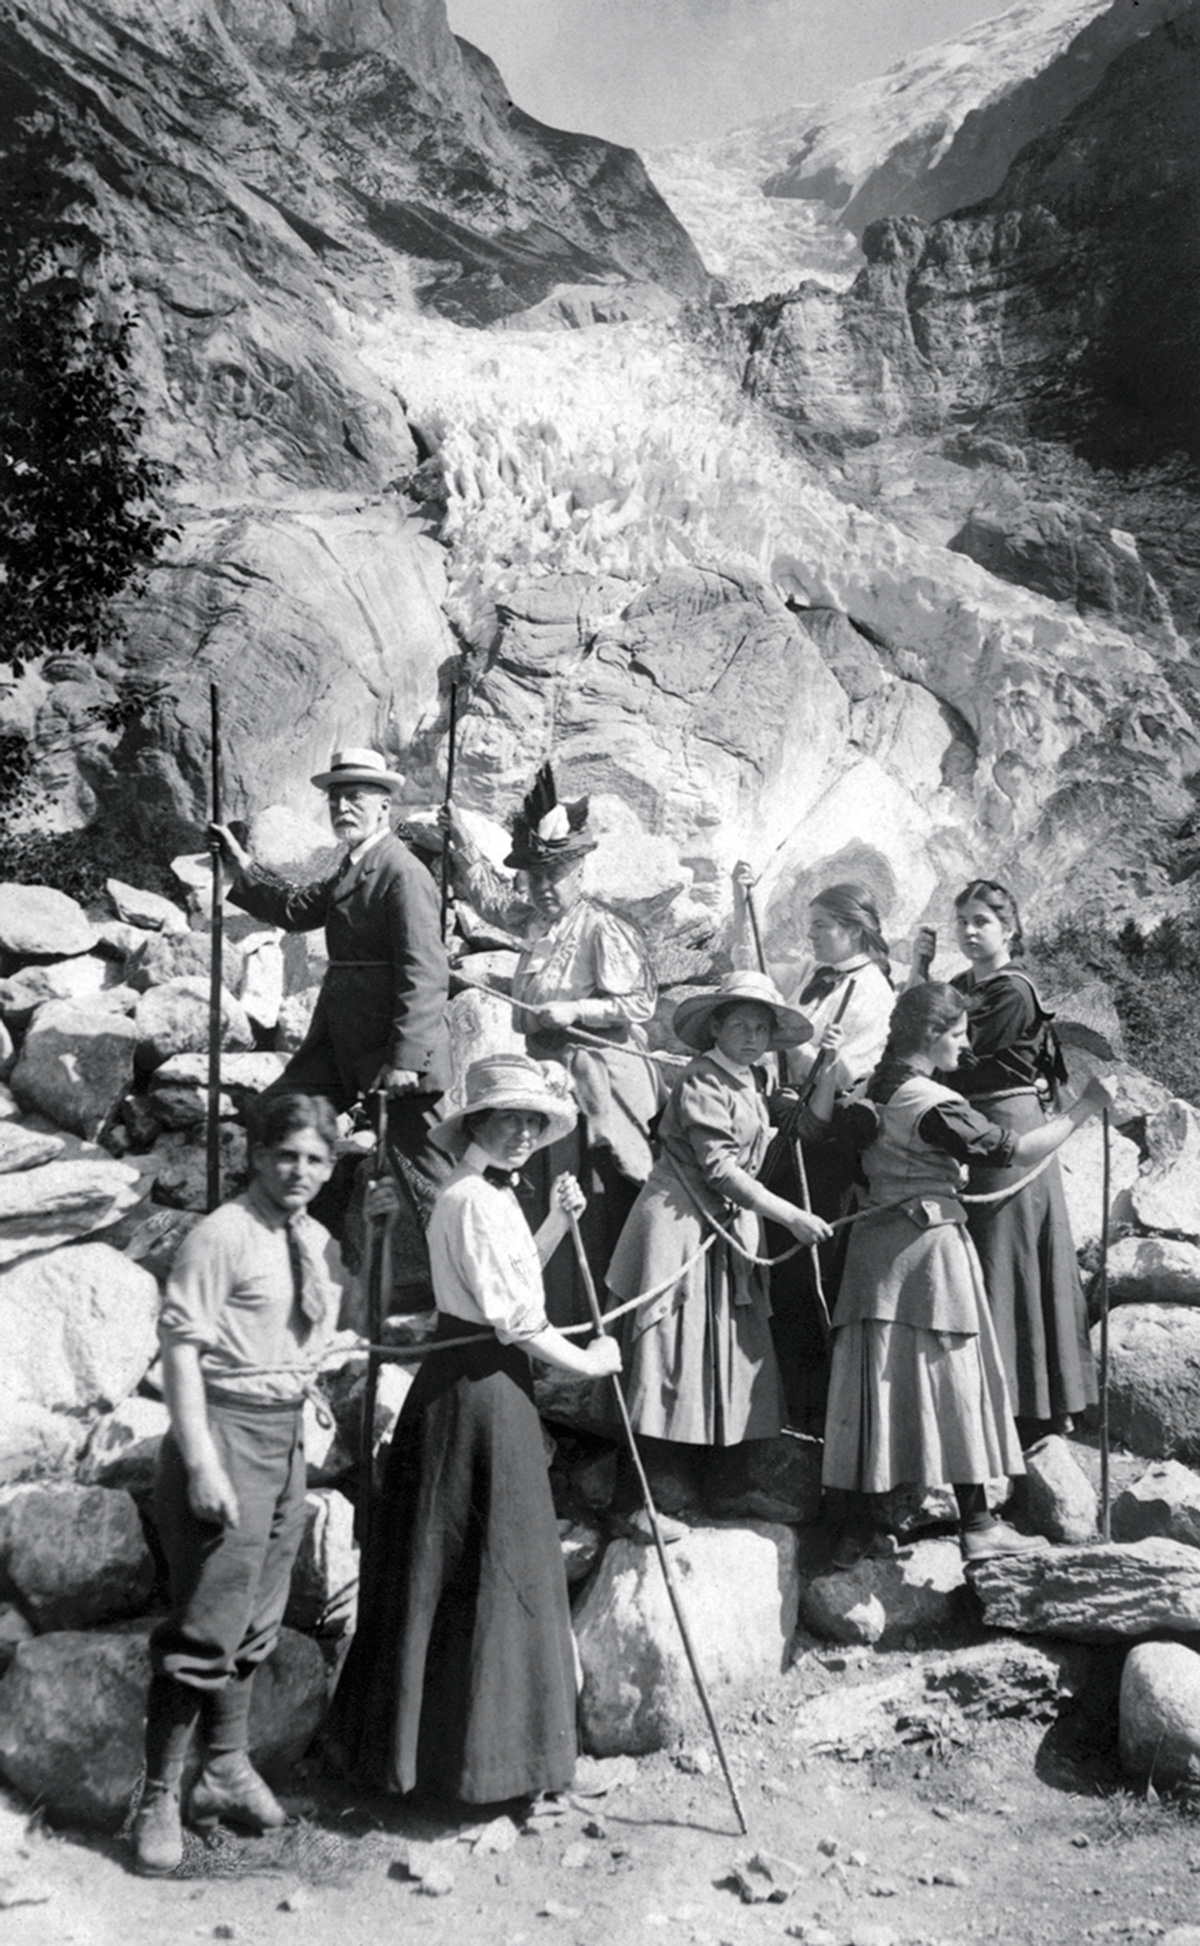 The Putnam family on a climbing expedition at Grindelwald before the 1911 psychoanalytic congress at Weimar, where Putnam would deliver his American “plea” for a new, philosophically inclined approach to analysis. Courtesy George Prochnik.